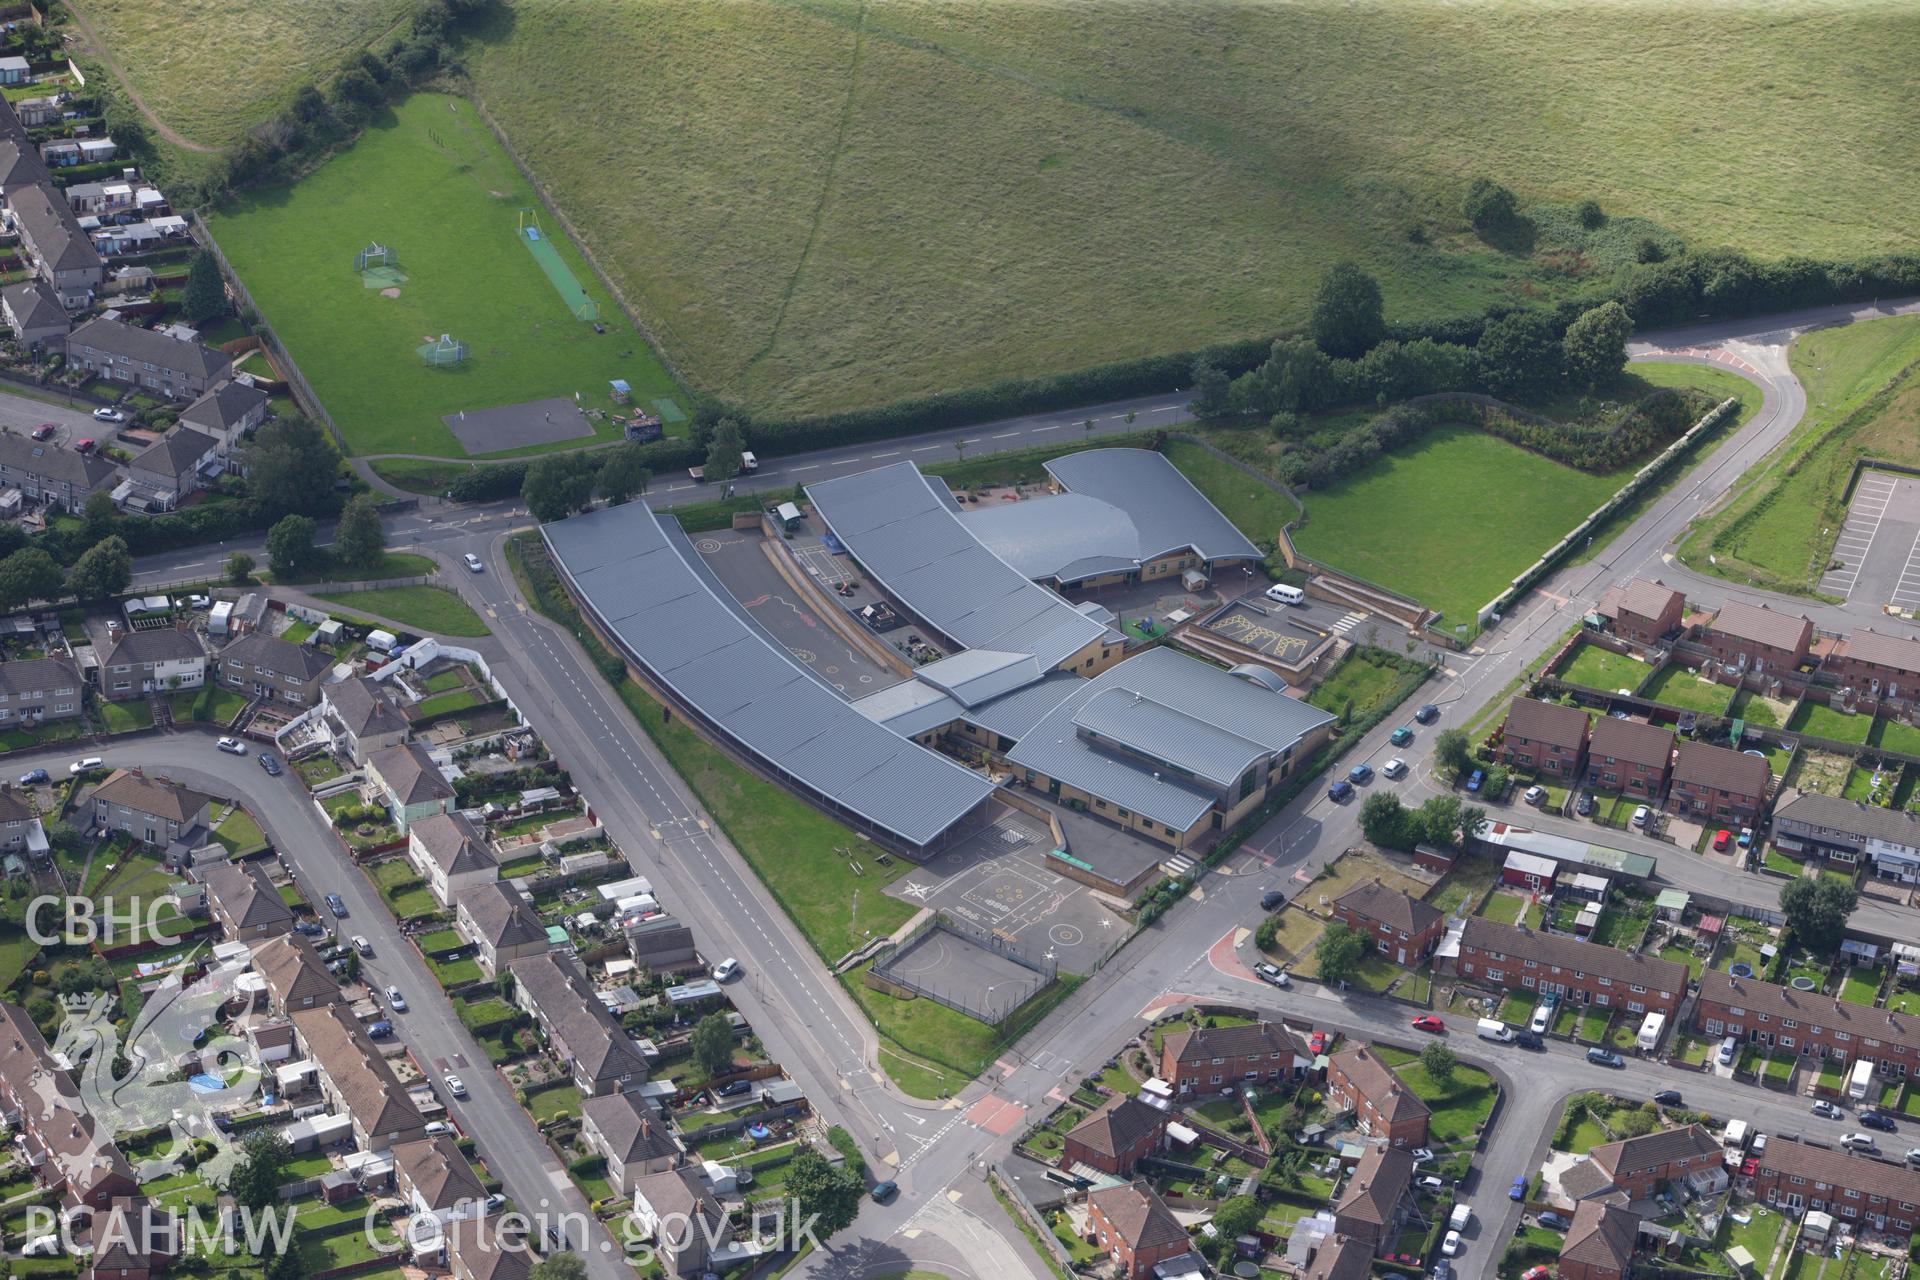 RCAHMW colour oblique aerial photograph of Deri View Primary School and Acorn Centre. Taken on 23 July 2009 by Toby Driver